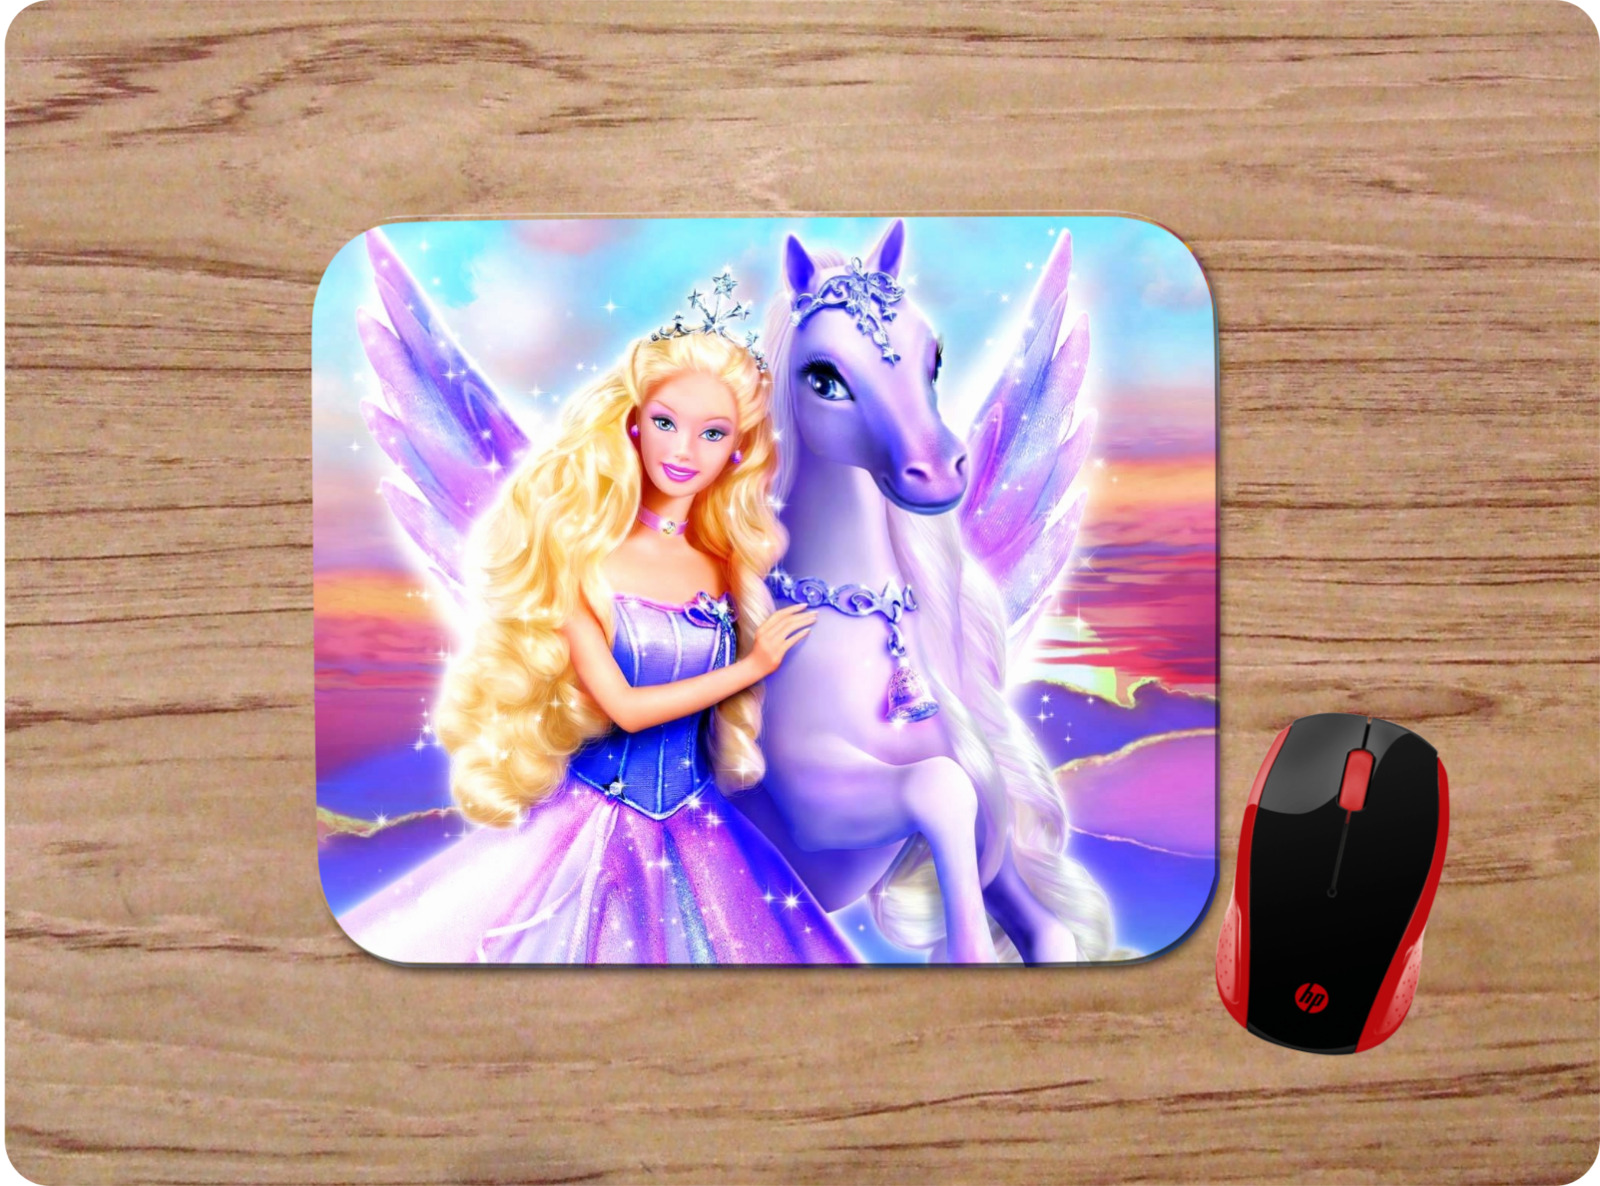 BARBIE W/ PEGASUS - COLORFUL MOUSE PAD DESK MAT - HOME SCHOOL OFFICE GIFT - NEW